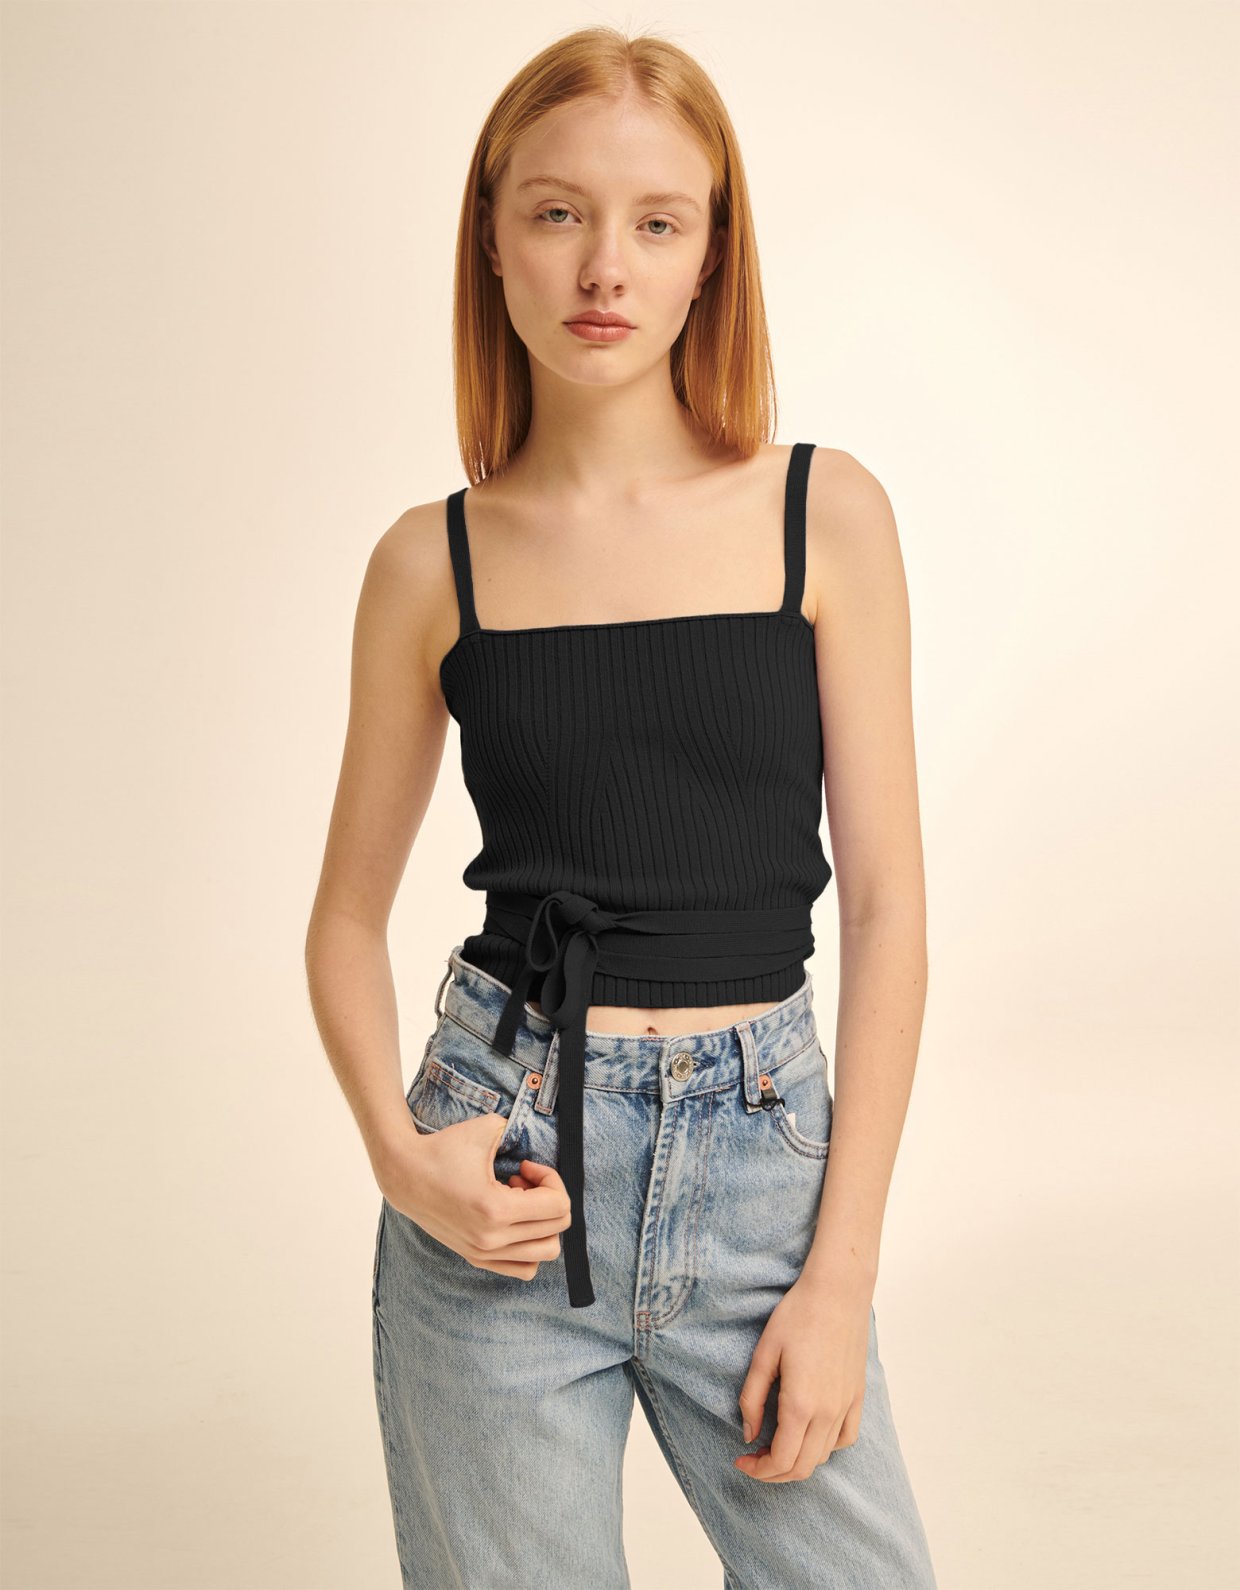 Combos Knitwear Combos S002 – Knitted top cord black